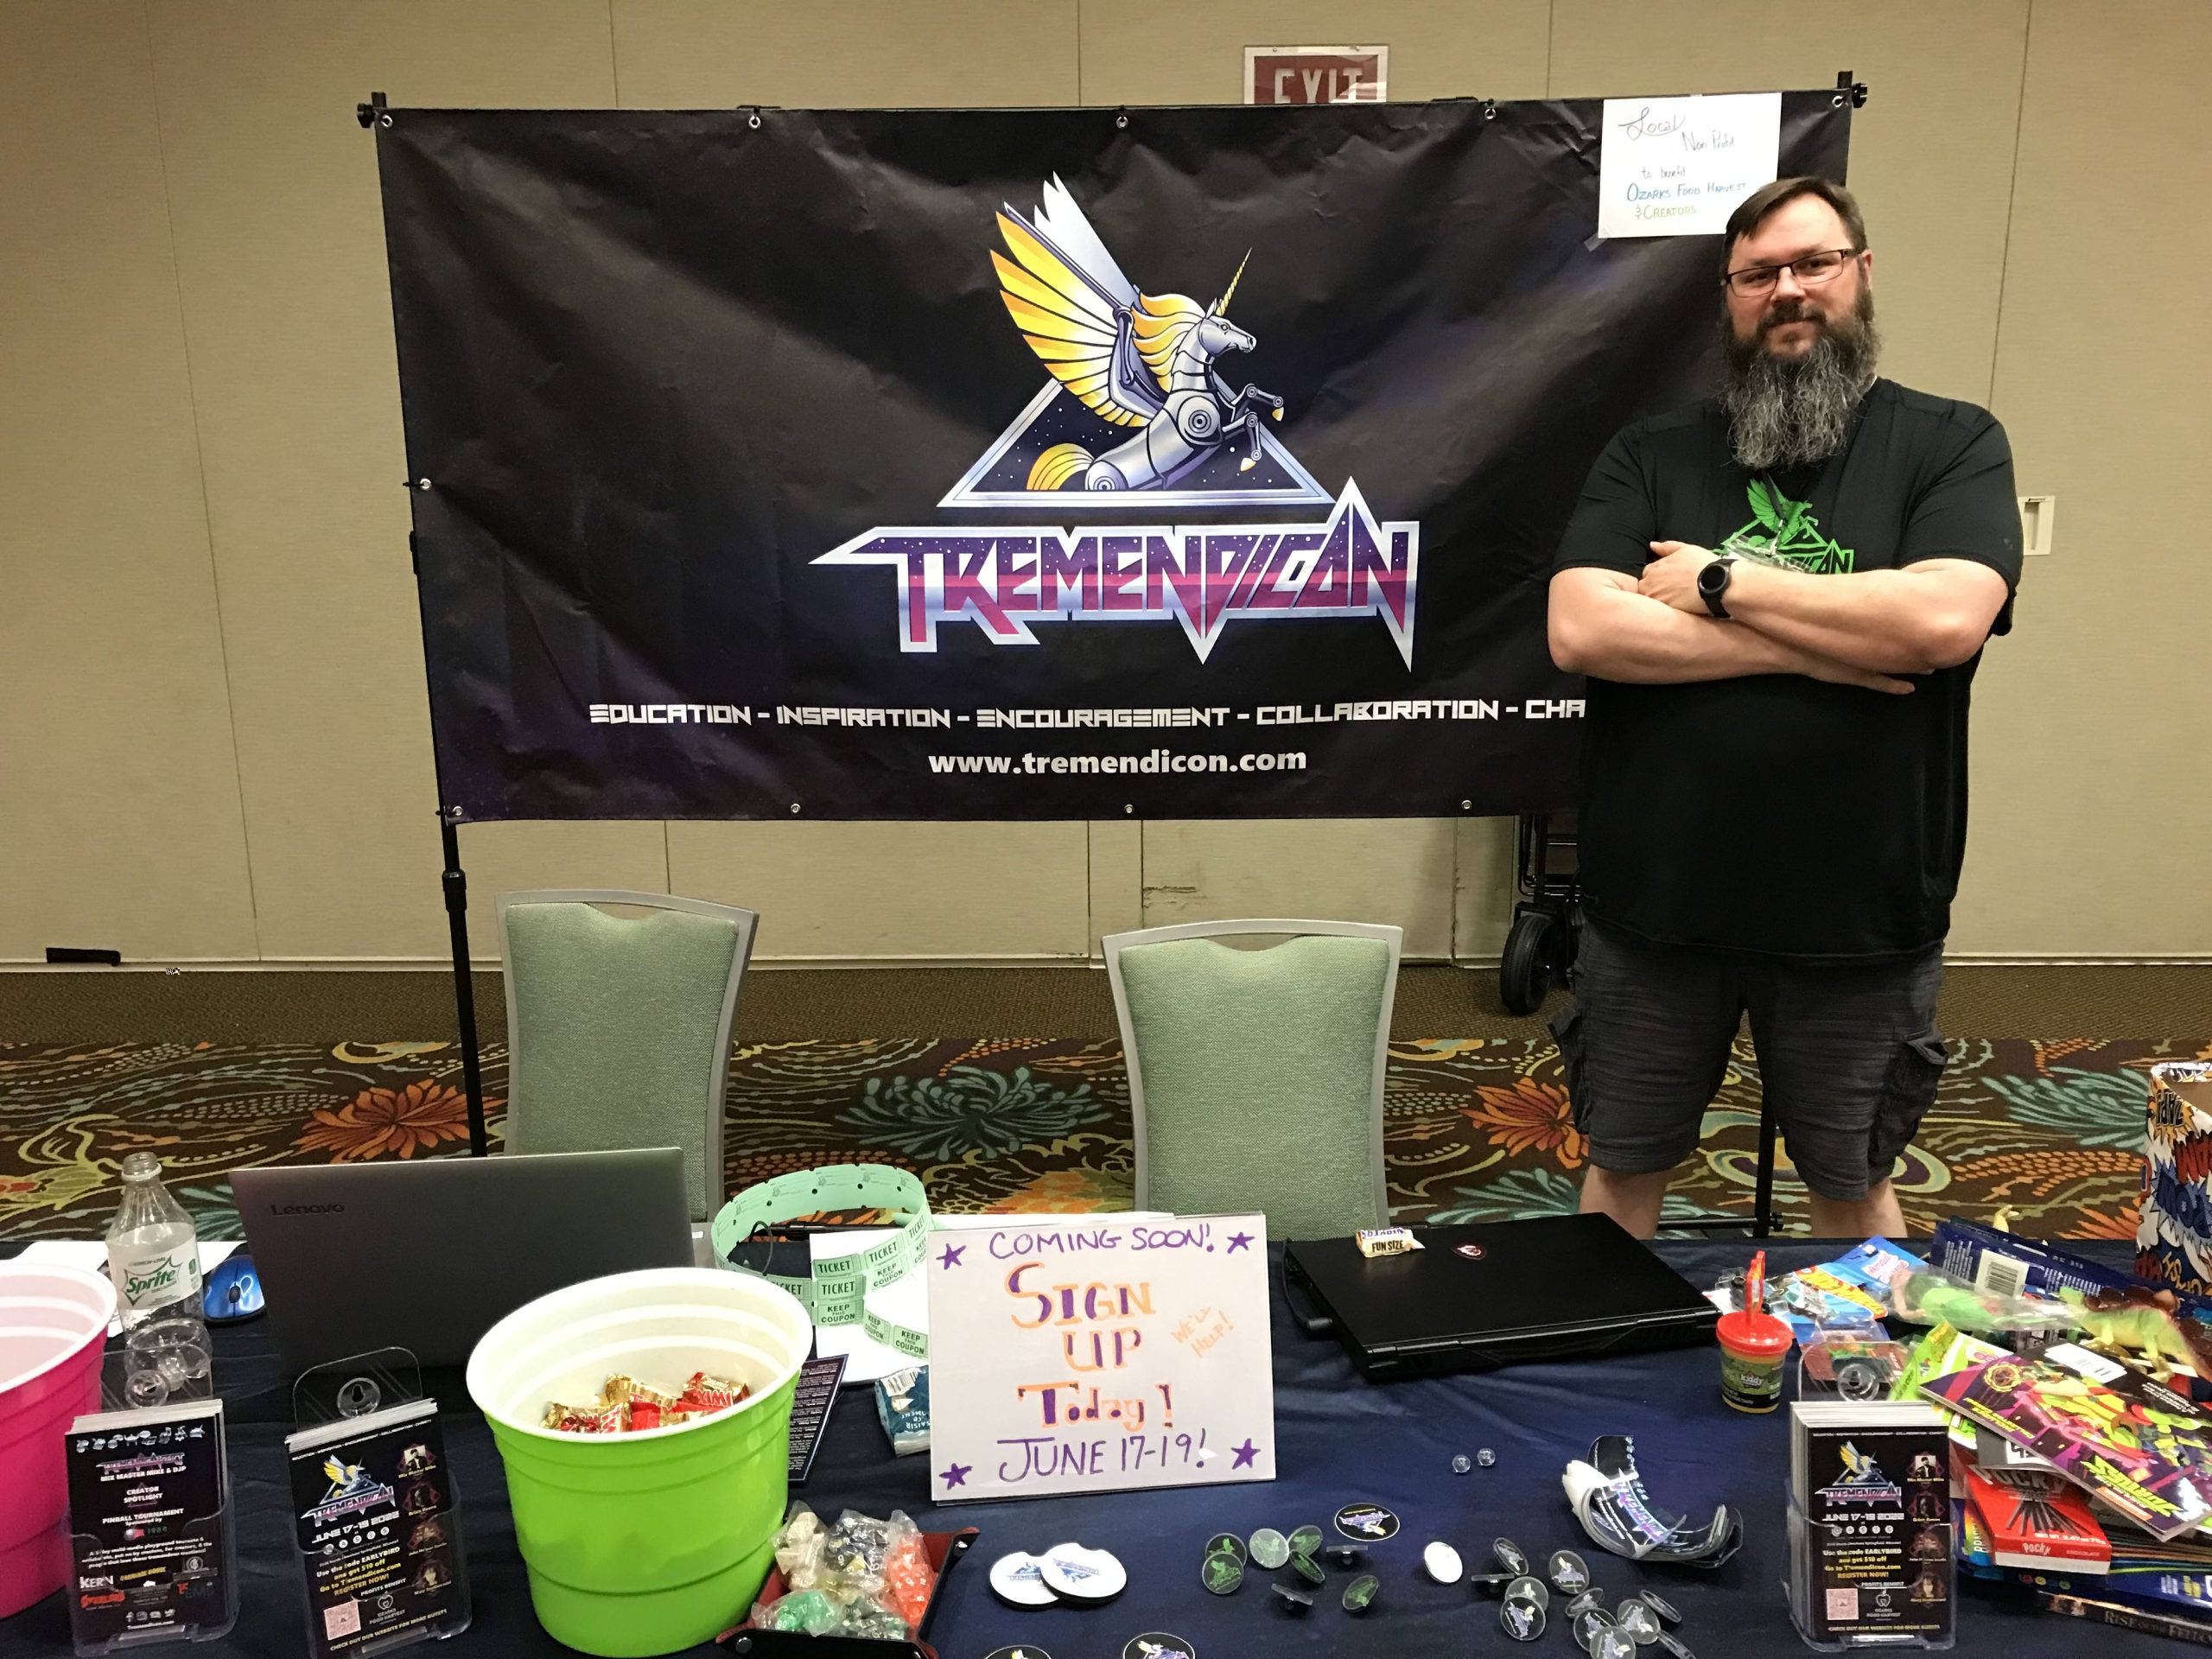 Springfield's latest game and comic conference, Tremendicon, aimed at creators